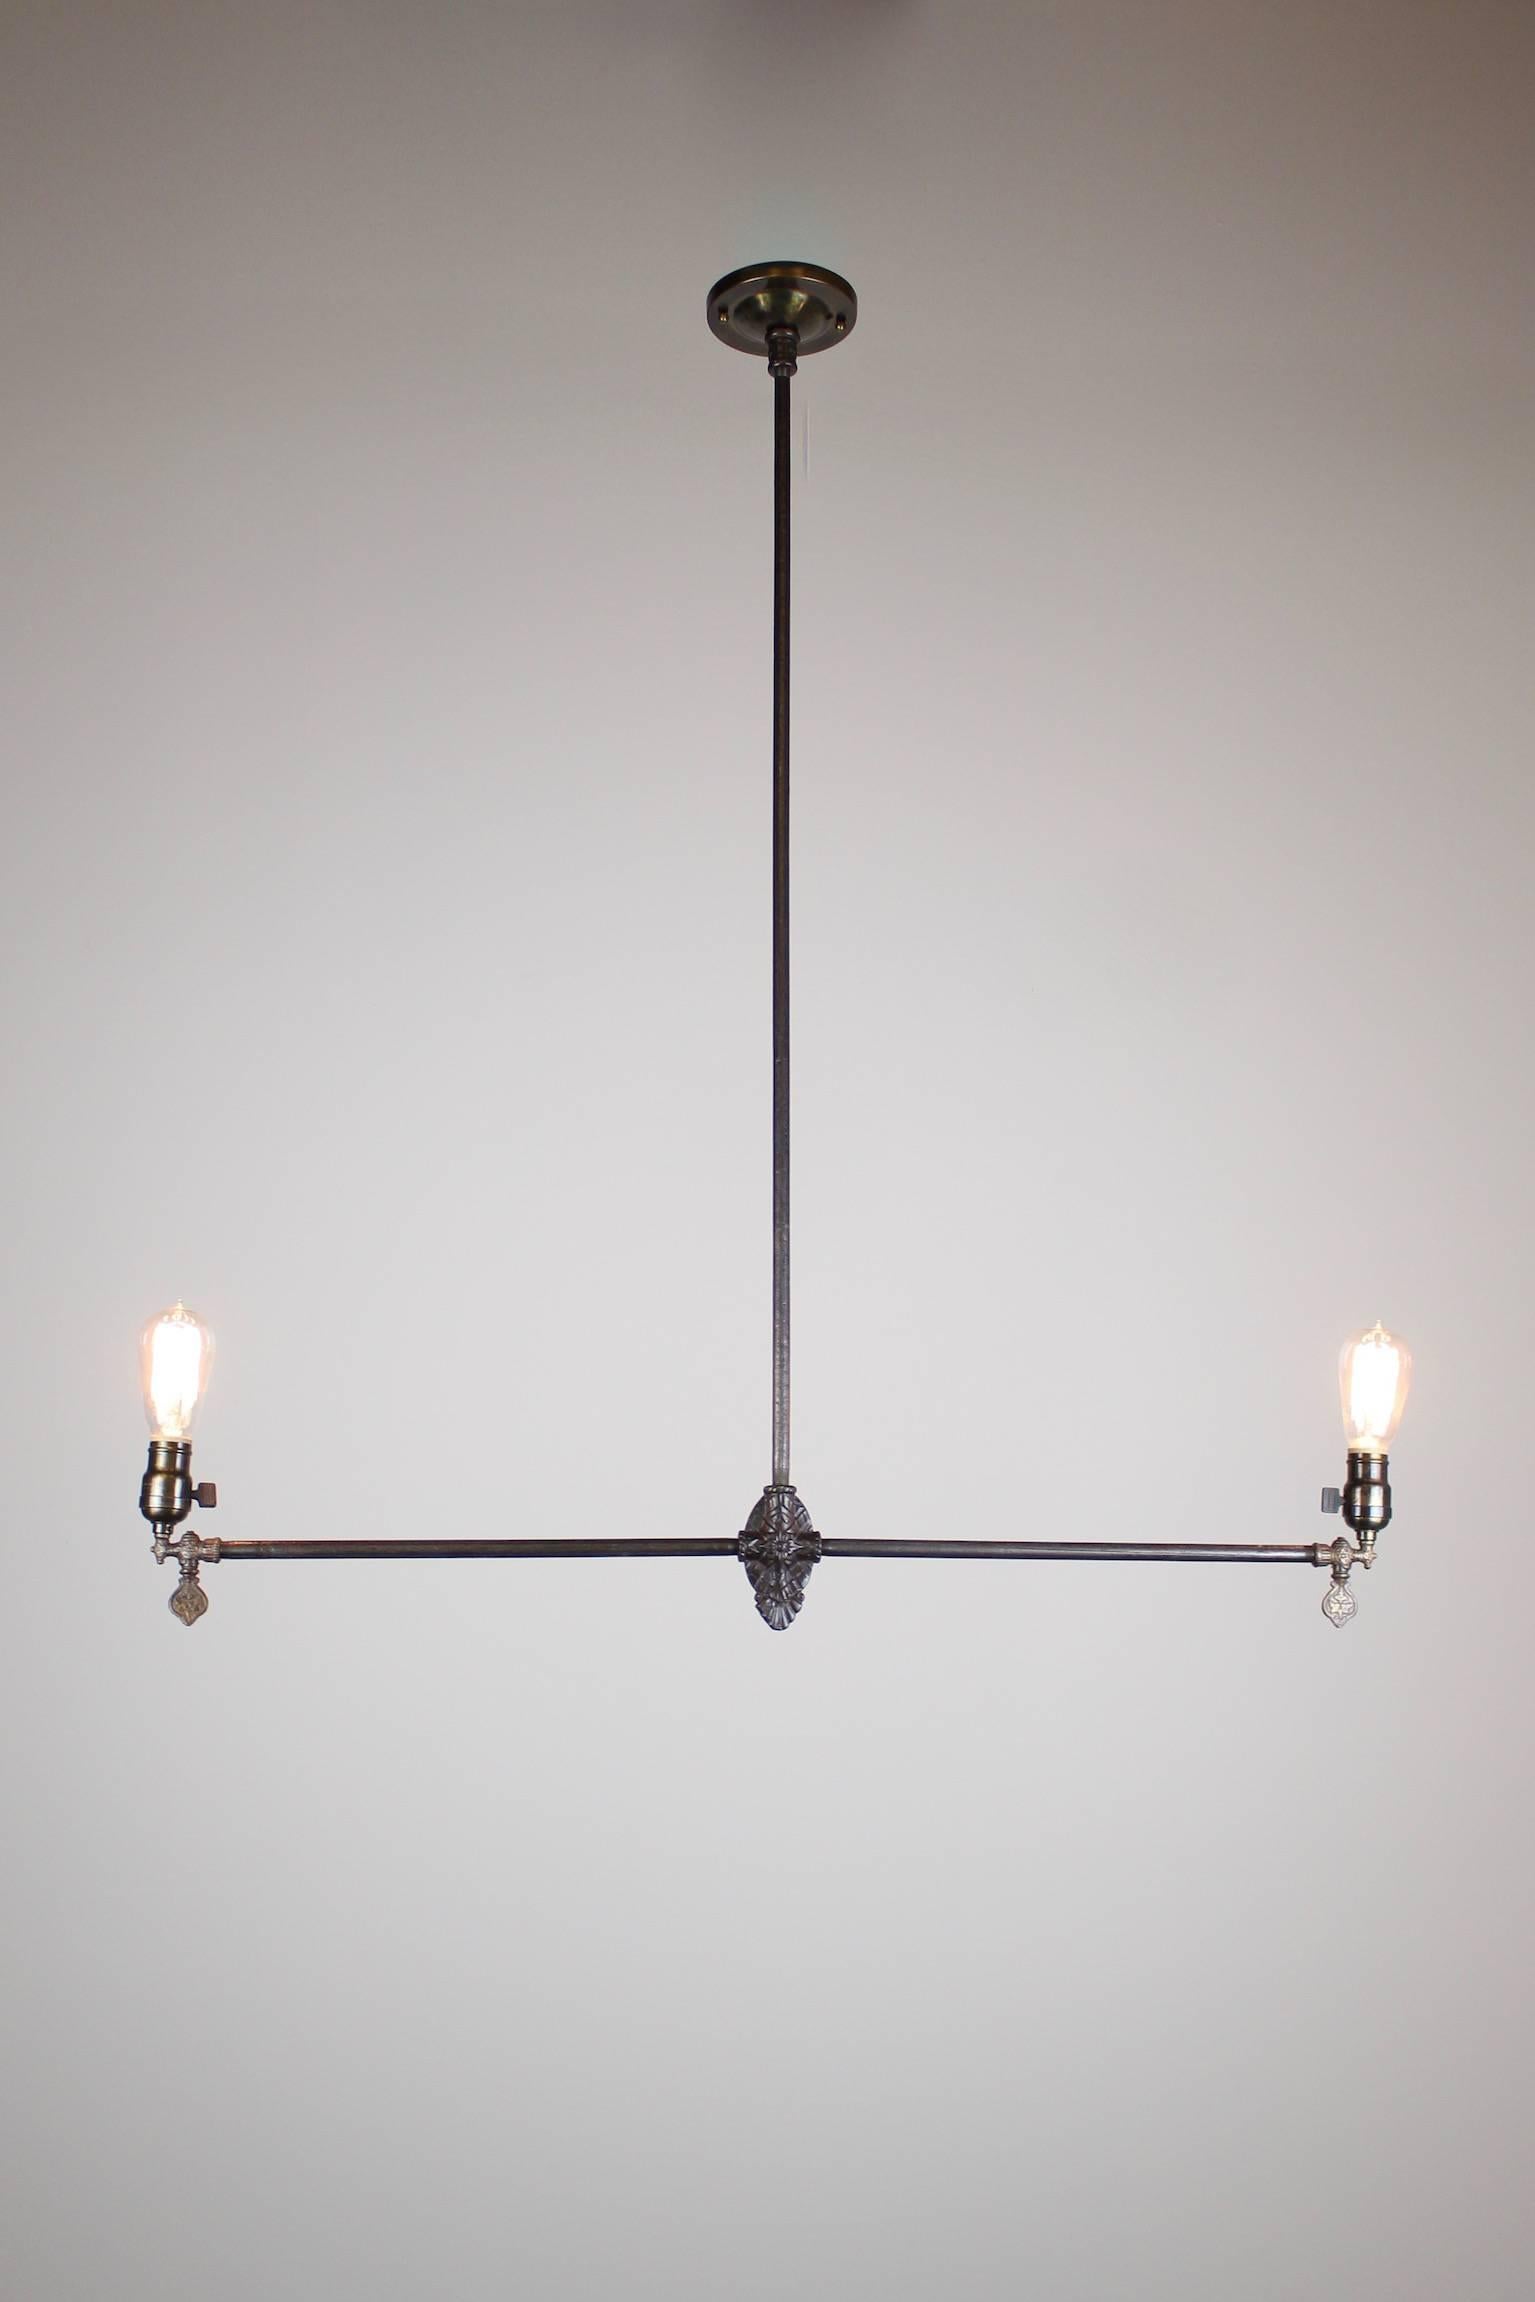 All original American Industrial gas light fixture, attributed to Archer & Pancoast of New York City, circa 1885. These lights were typically found in warehouses, commercial windows, factories, etc. This particular light is in a warm expresso